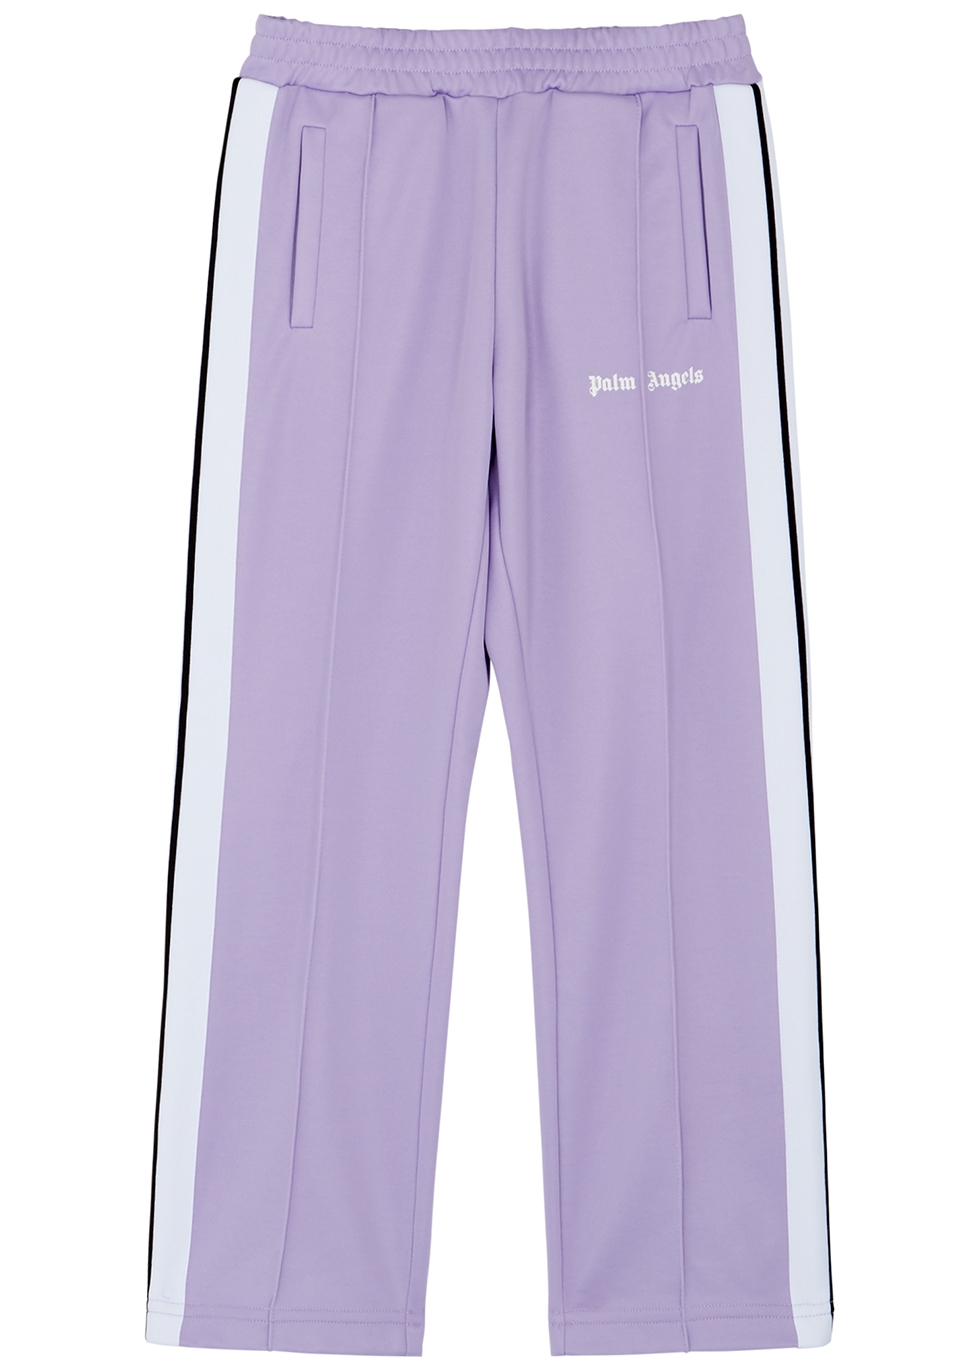 KIDS Lilac striped jersey track pants (4-10 years)